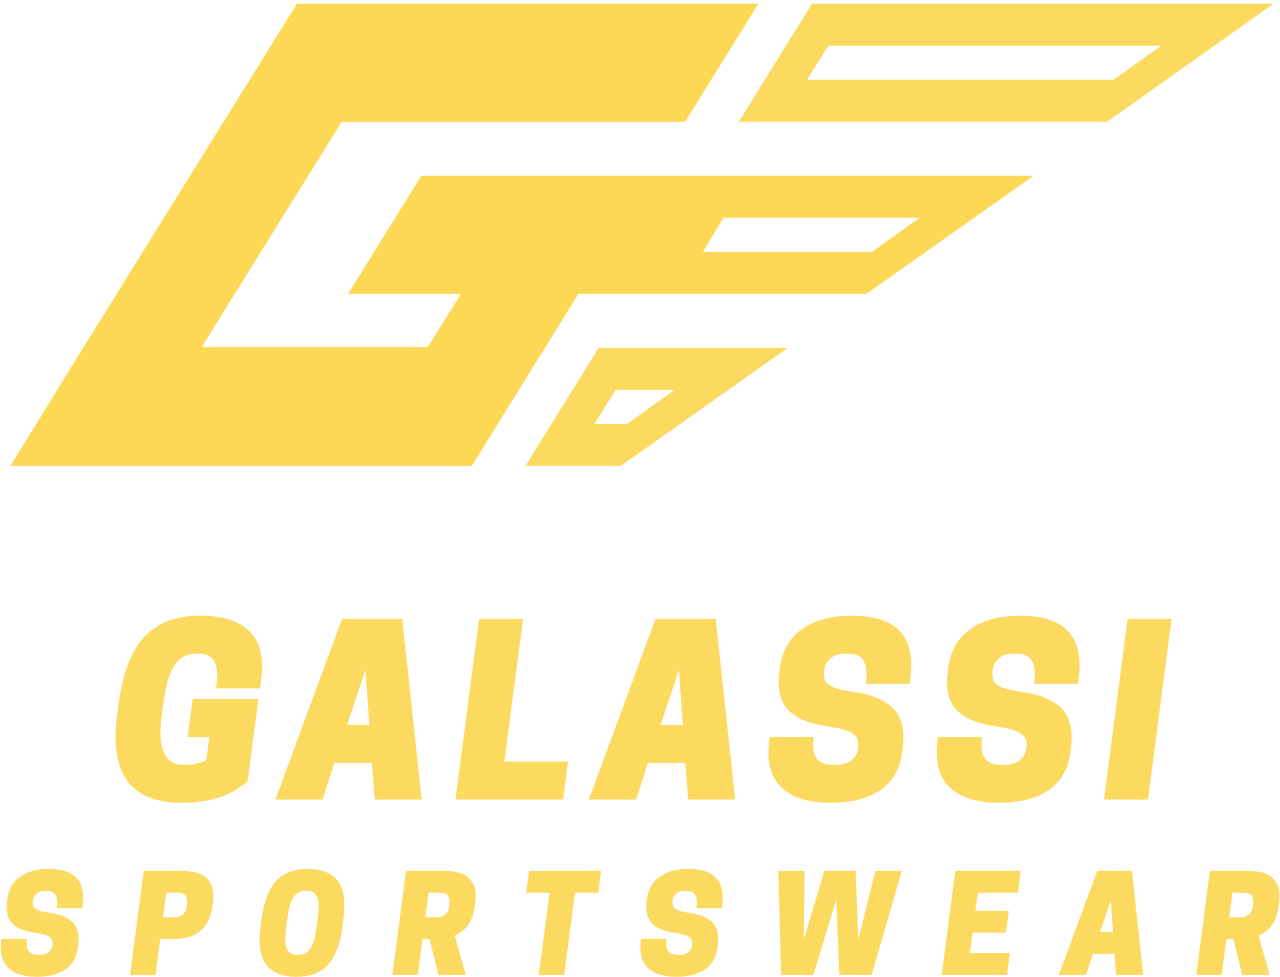 GALASSI's web page